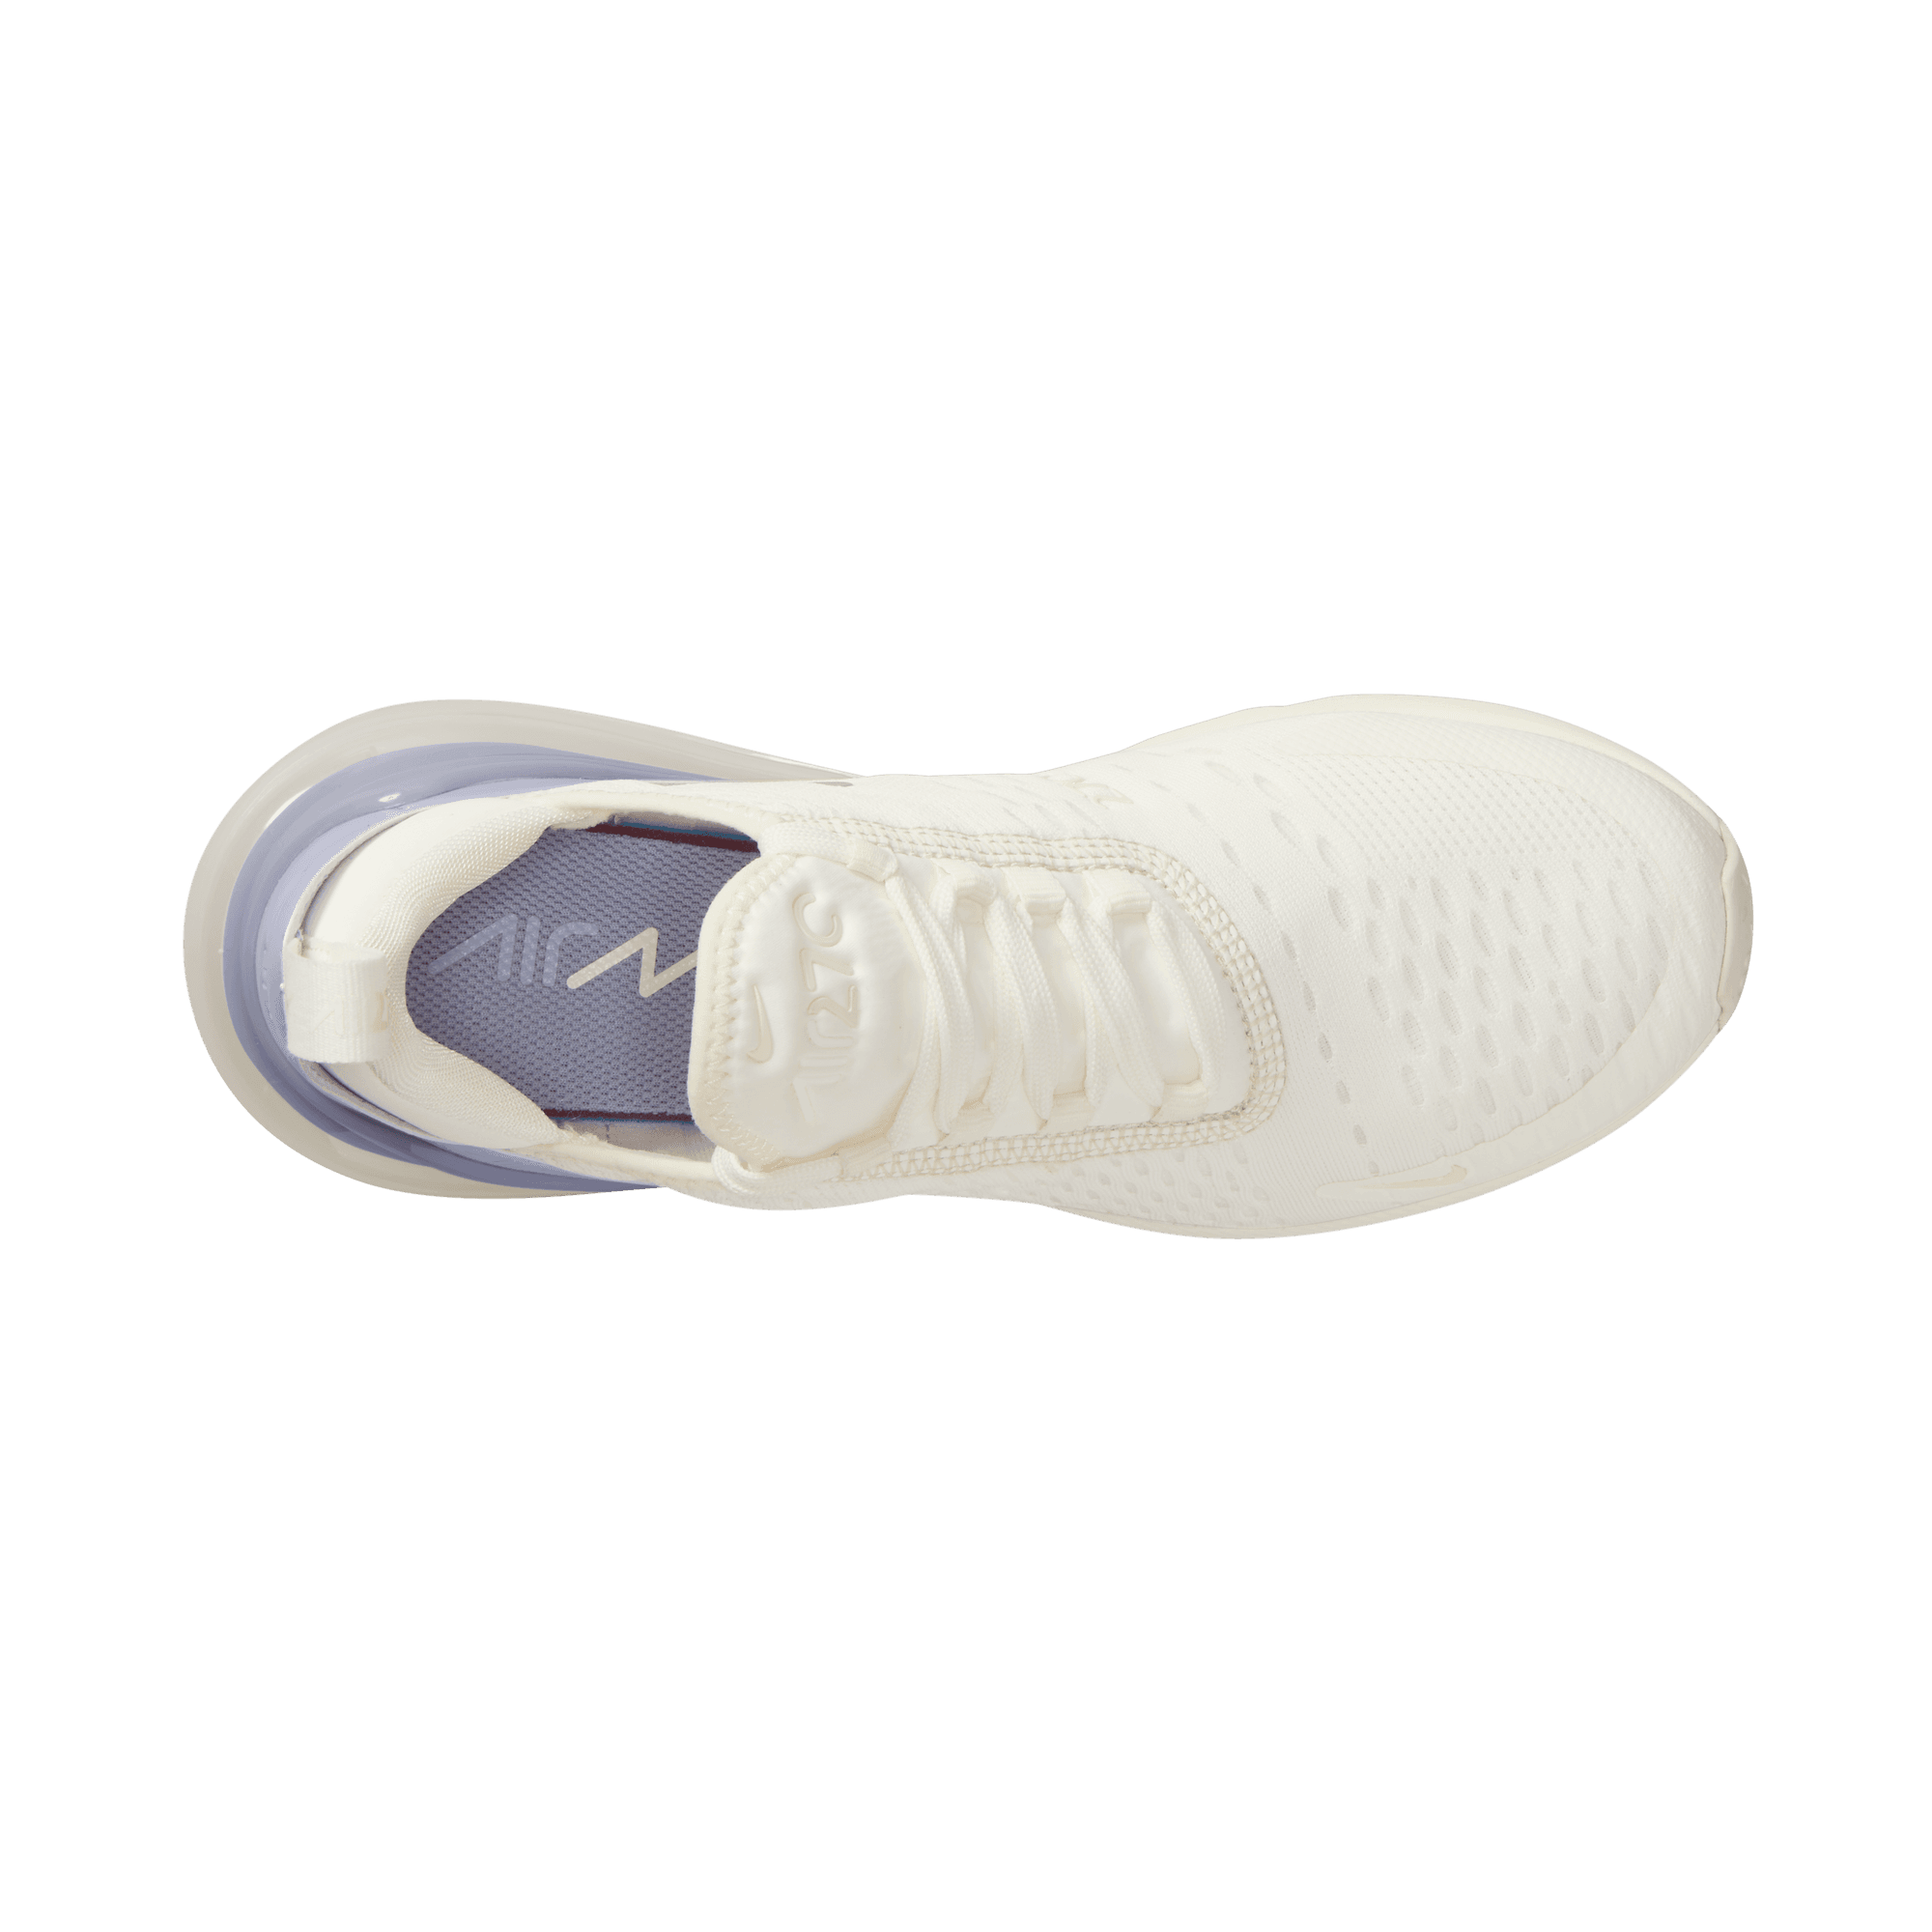 Nike Air Max 270 Trainers In Sail White And Oxygen Purple, FB2934-100